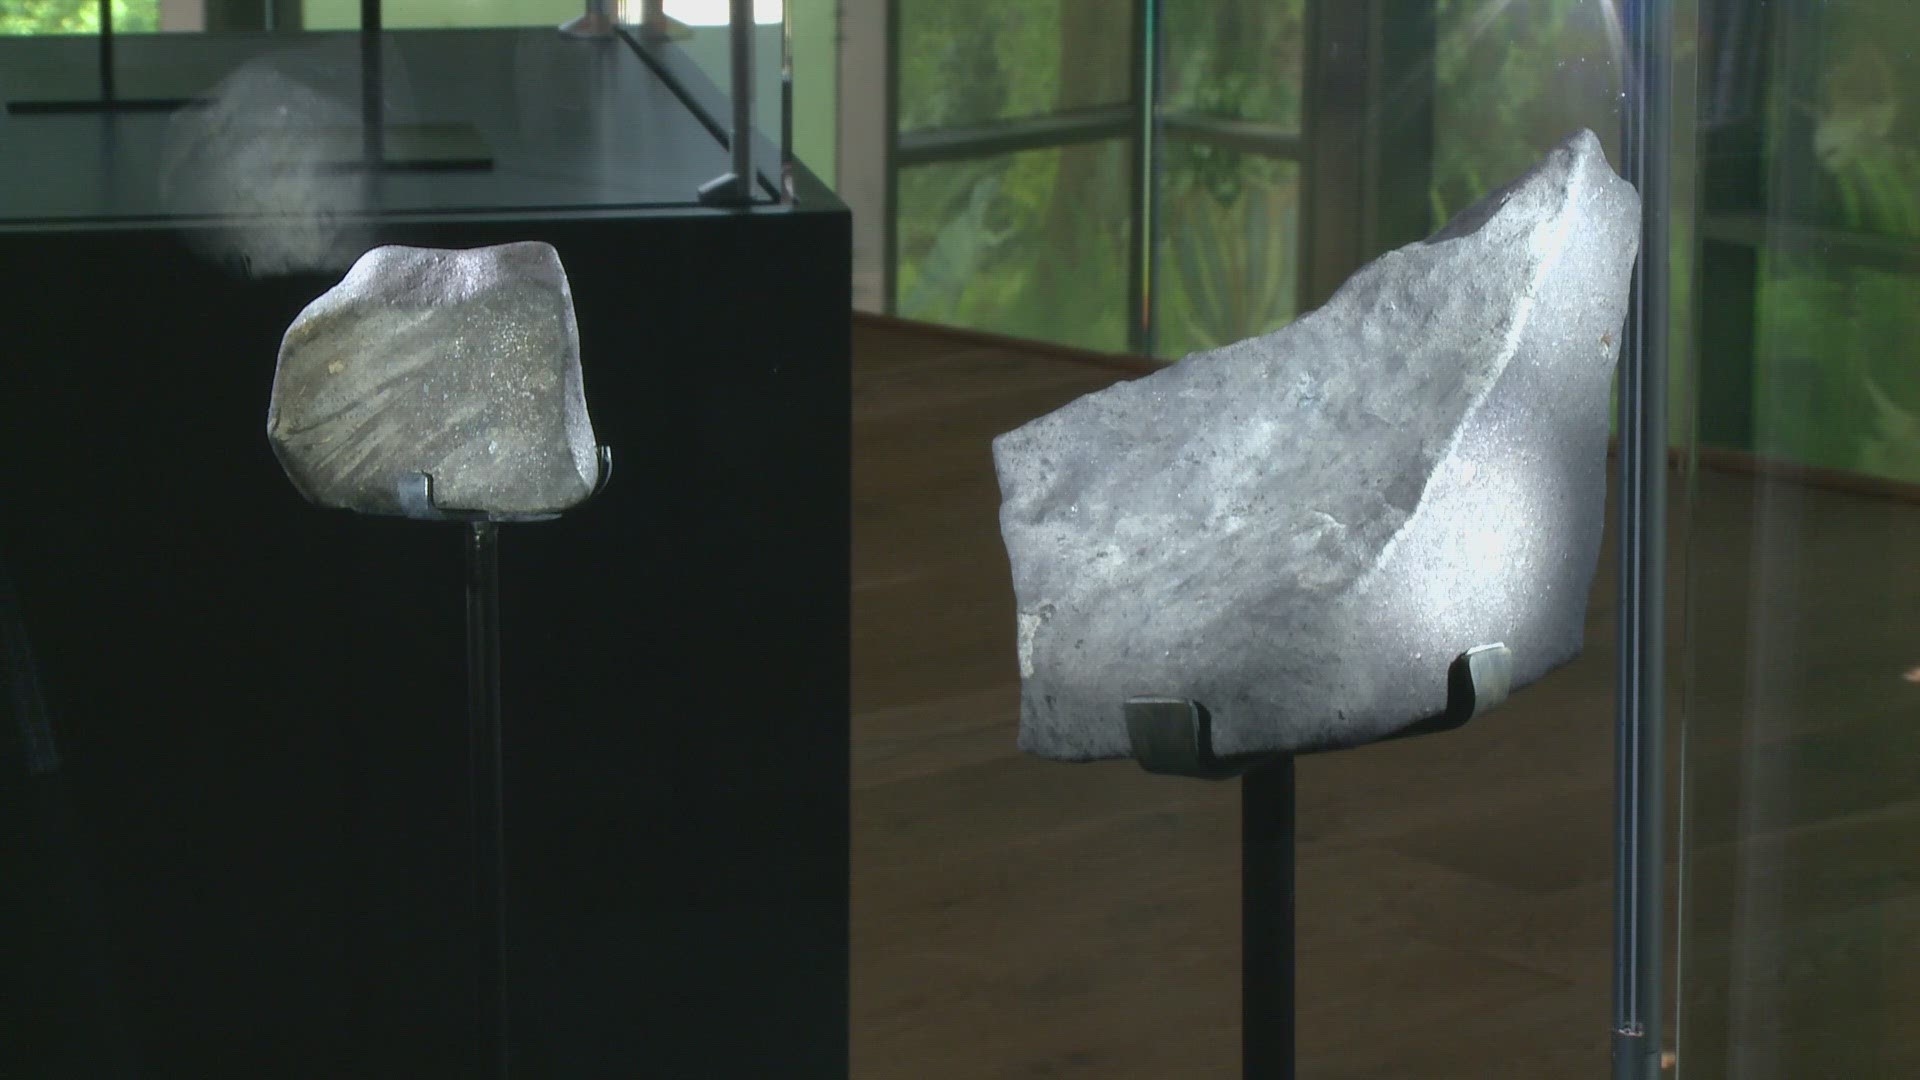 The exhibit, Welcome to Earth, tells the story of meteorites that scattered across The Rio Grande Valley earlier this year.